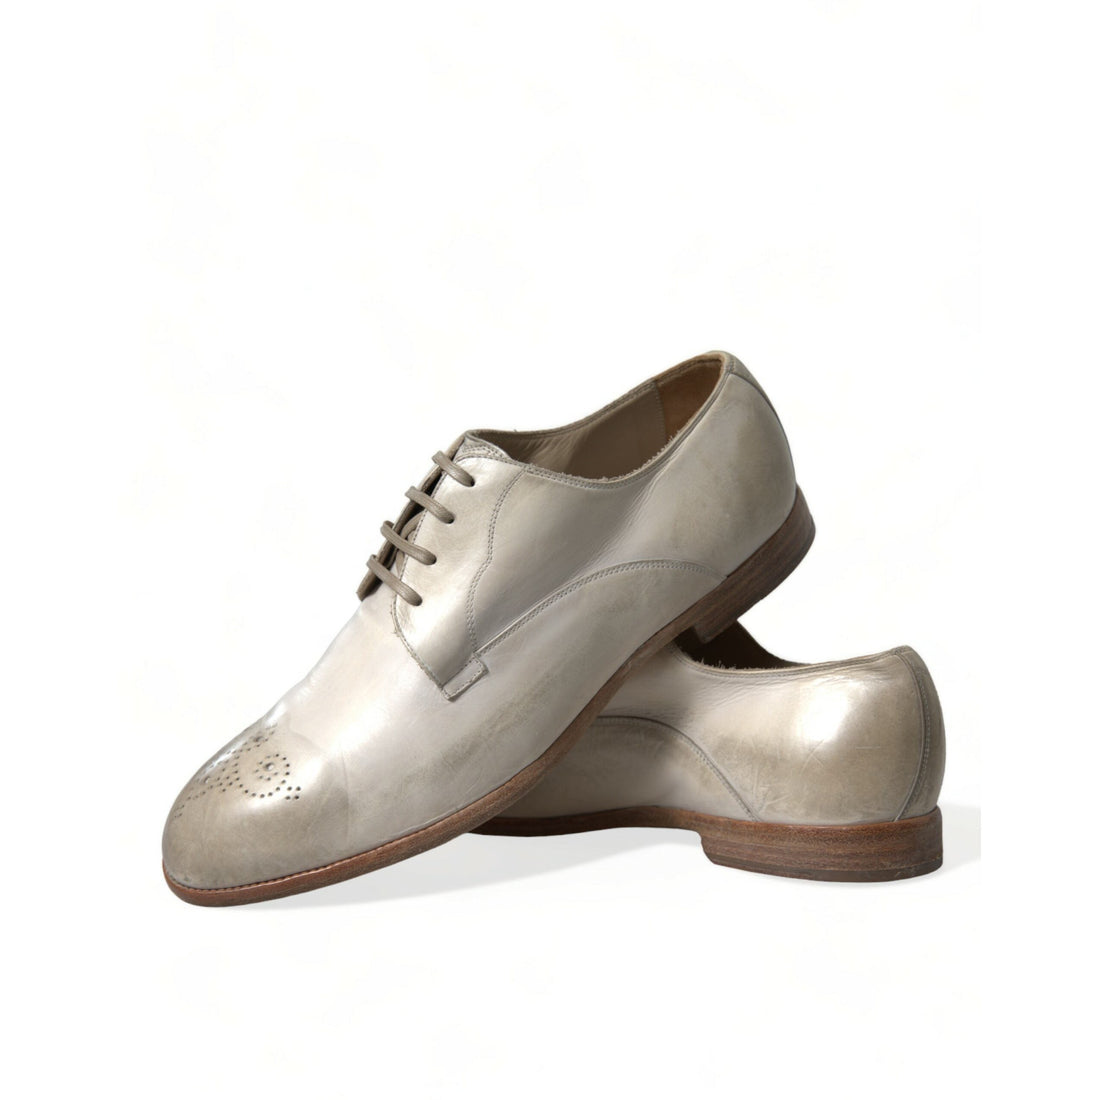 Dolce & Gabbana White Distressed Leather Derby Dress Shoes